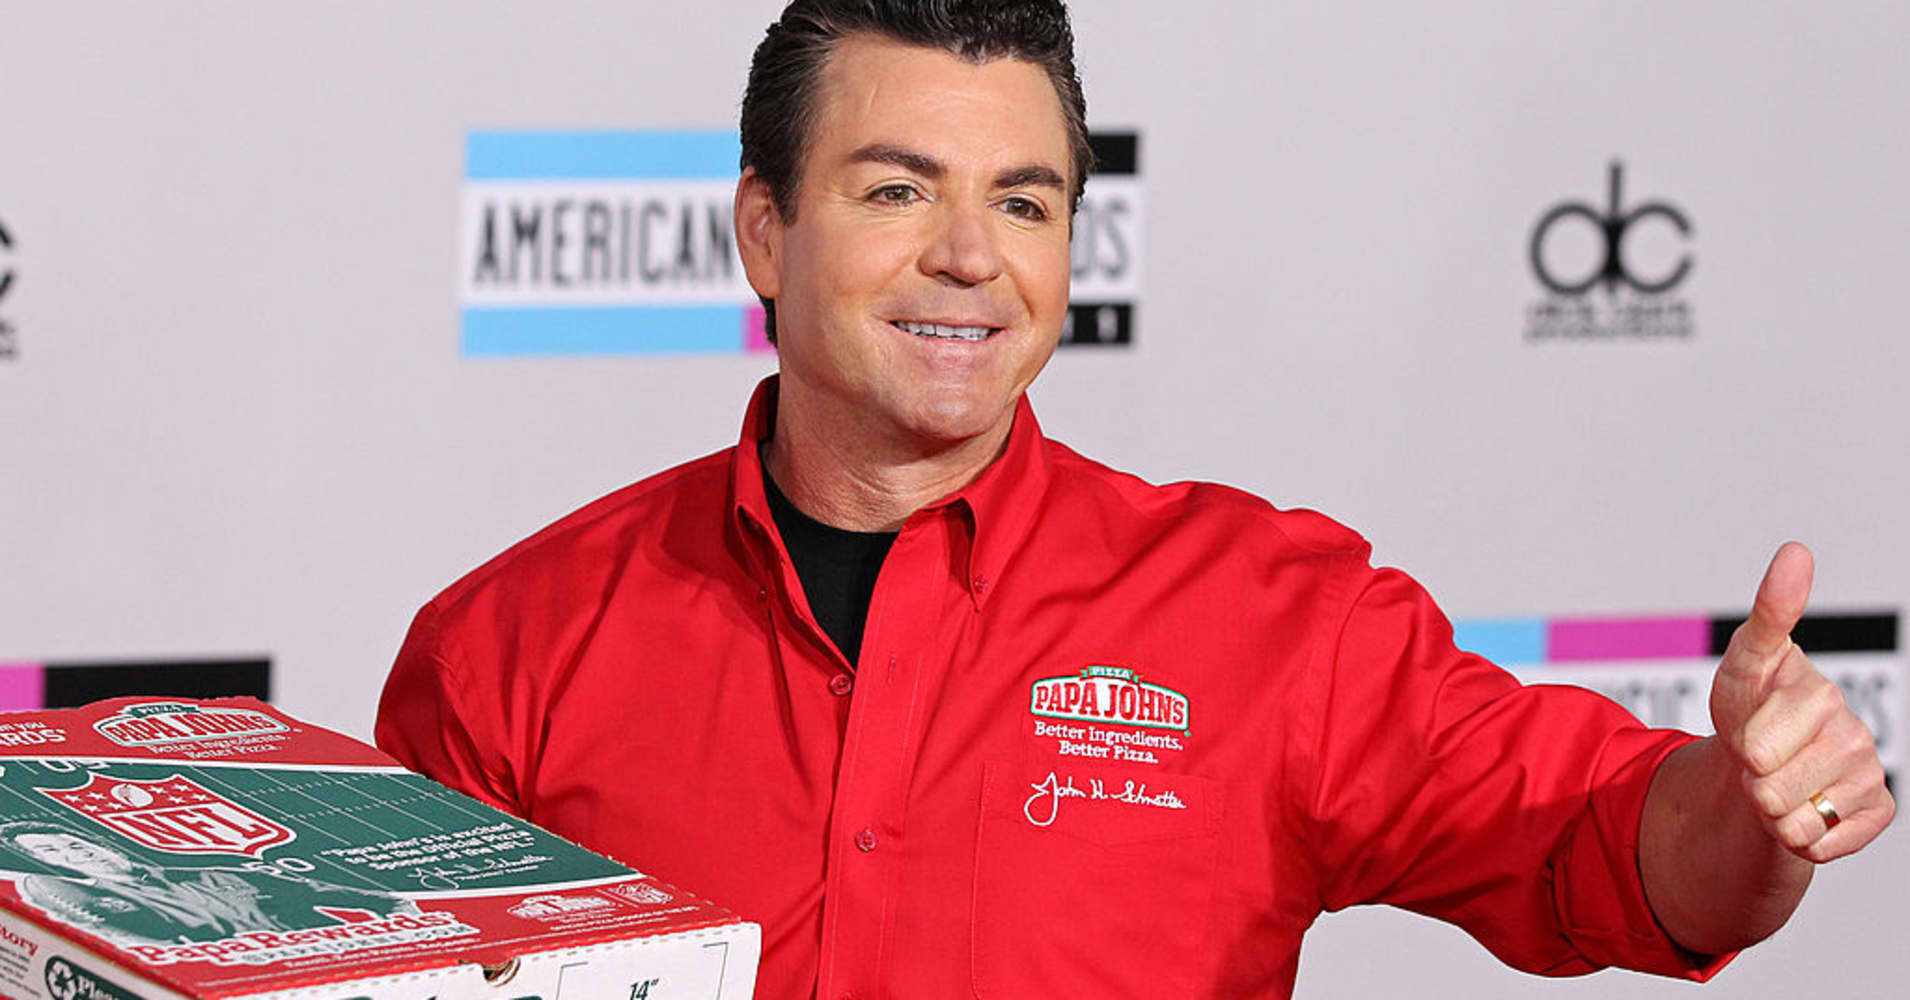 Papa John's founder John Schnatter to resign from board after independent director is named